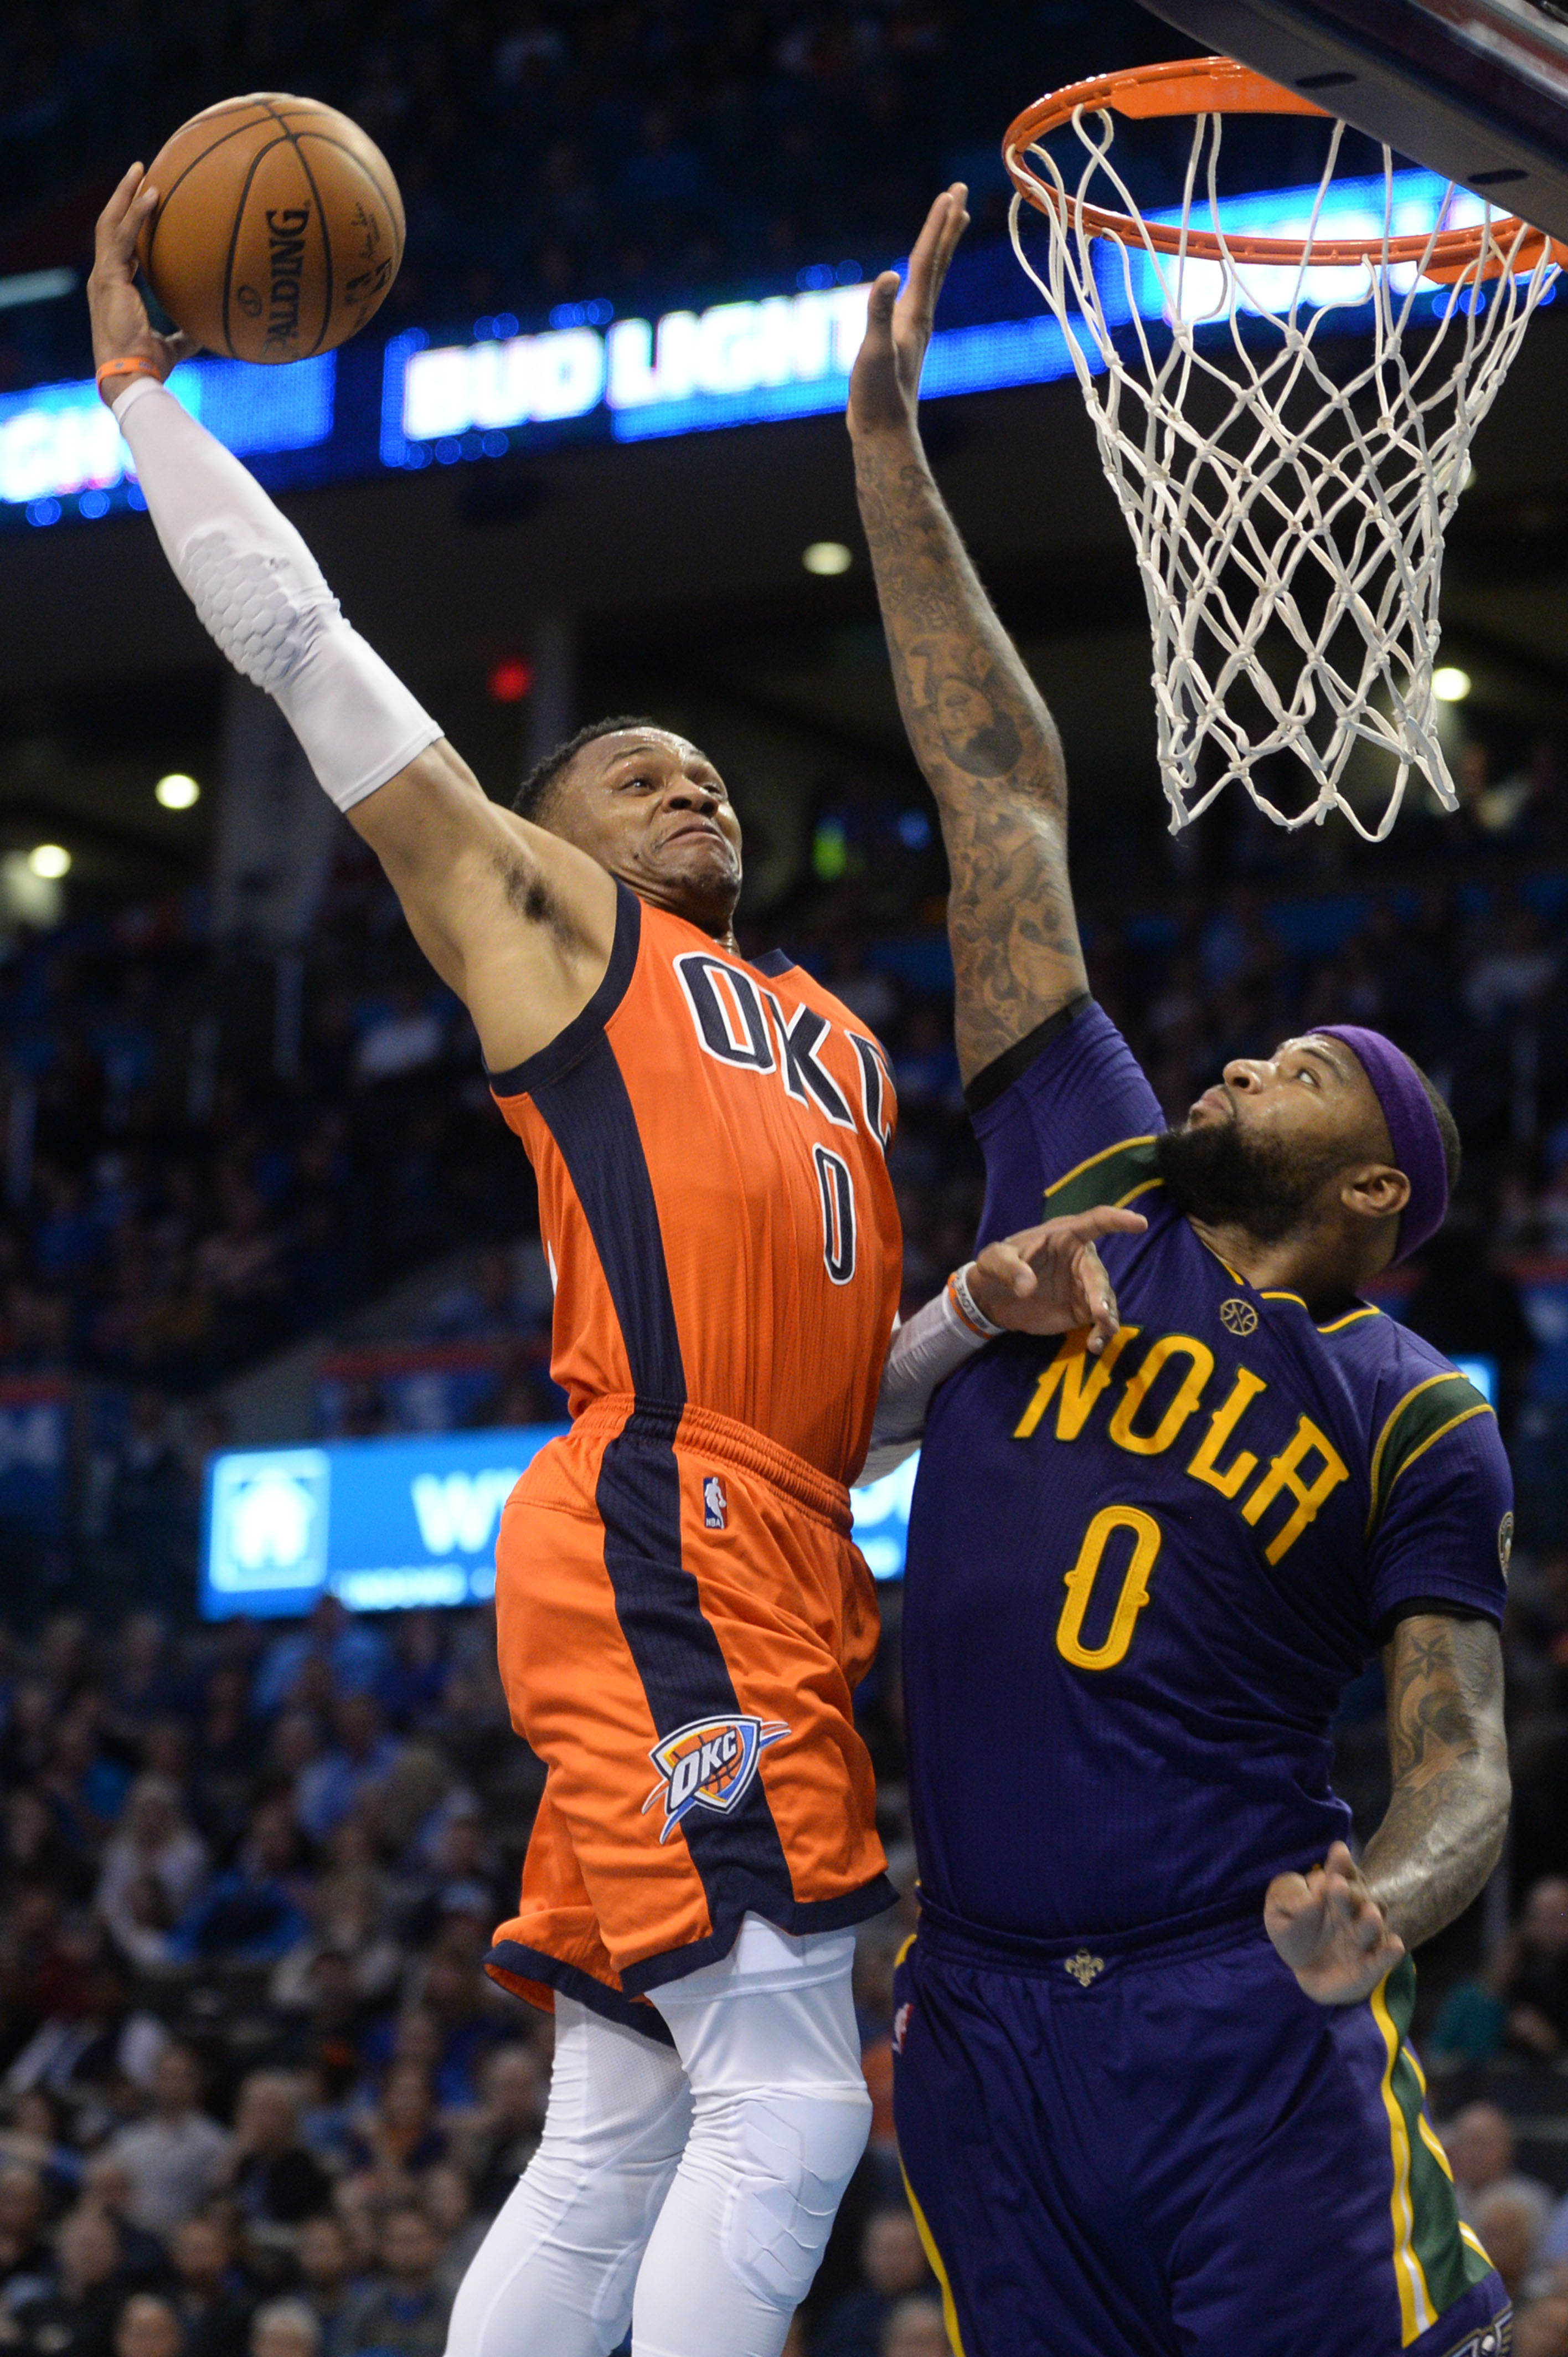 oklahoma city thunder defeat the new orleans pelicans2832 x 4256